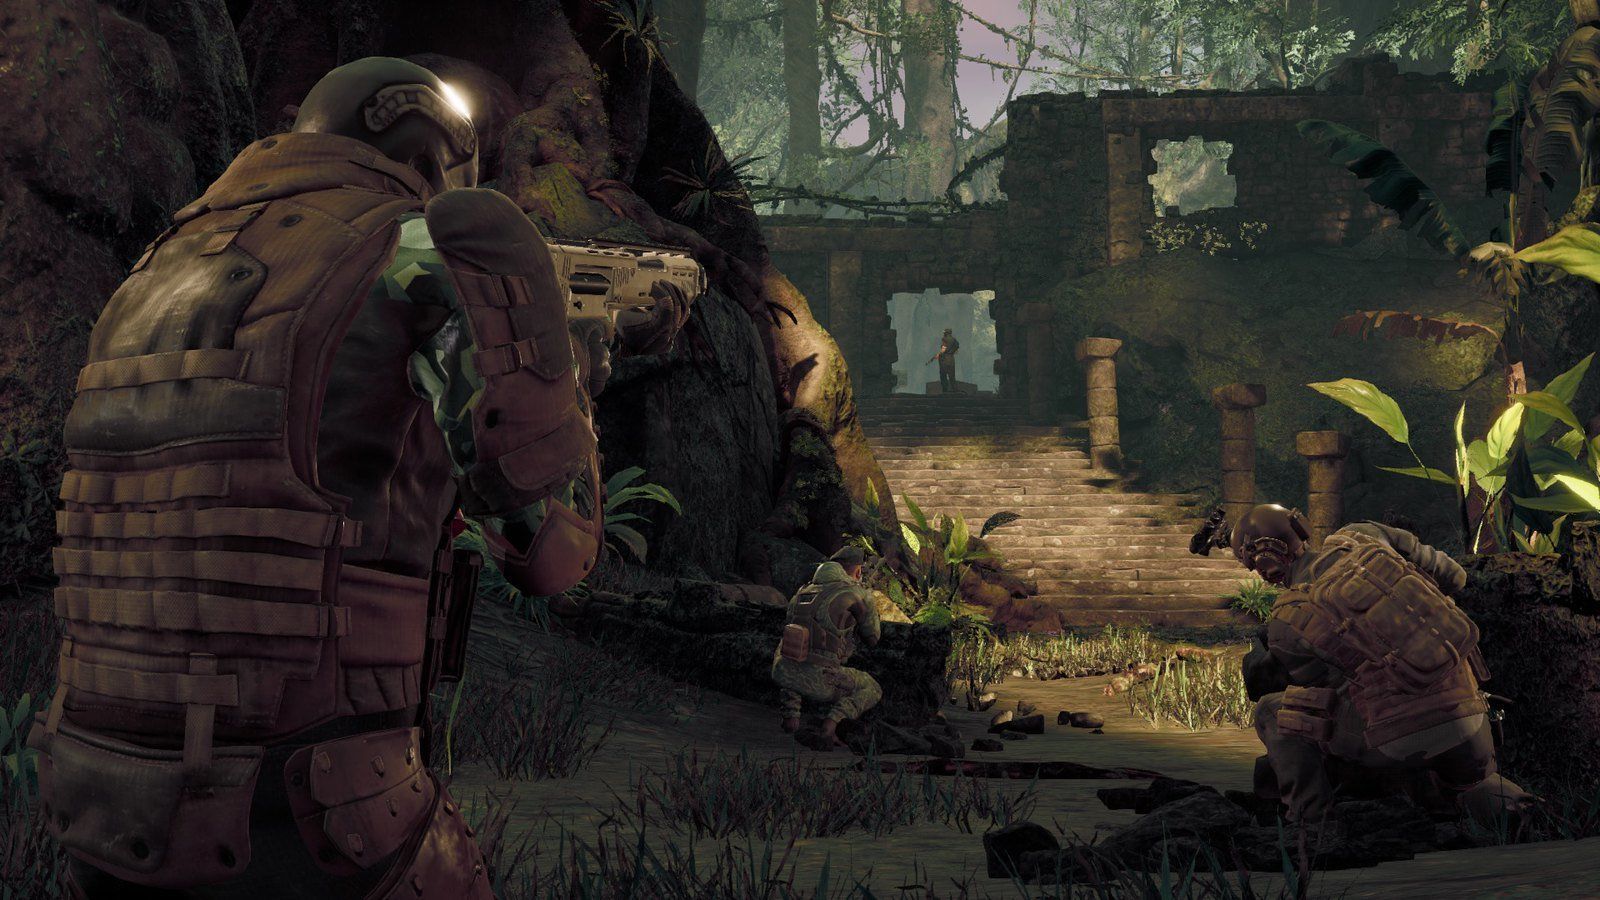 A multiplayer 'Predator' game is coming to PS4 next year